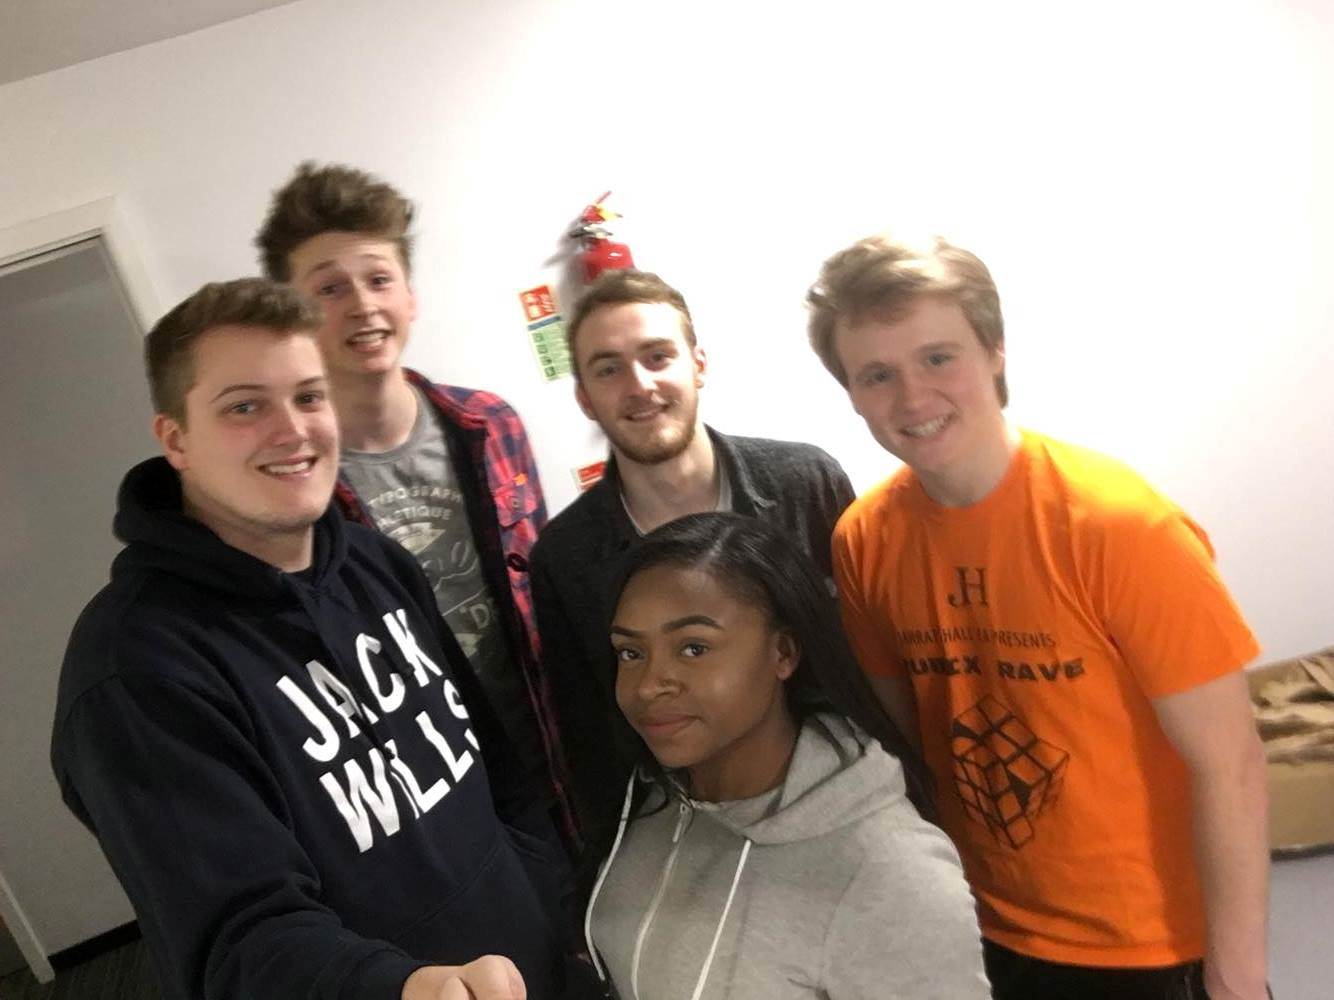 We are your current Residents’ Association committee also known as RAs. From left we have Clinton, Axel, Rhia, Taylor and Richard